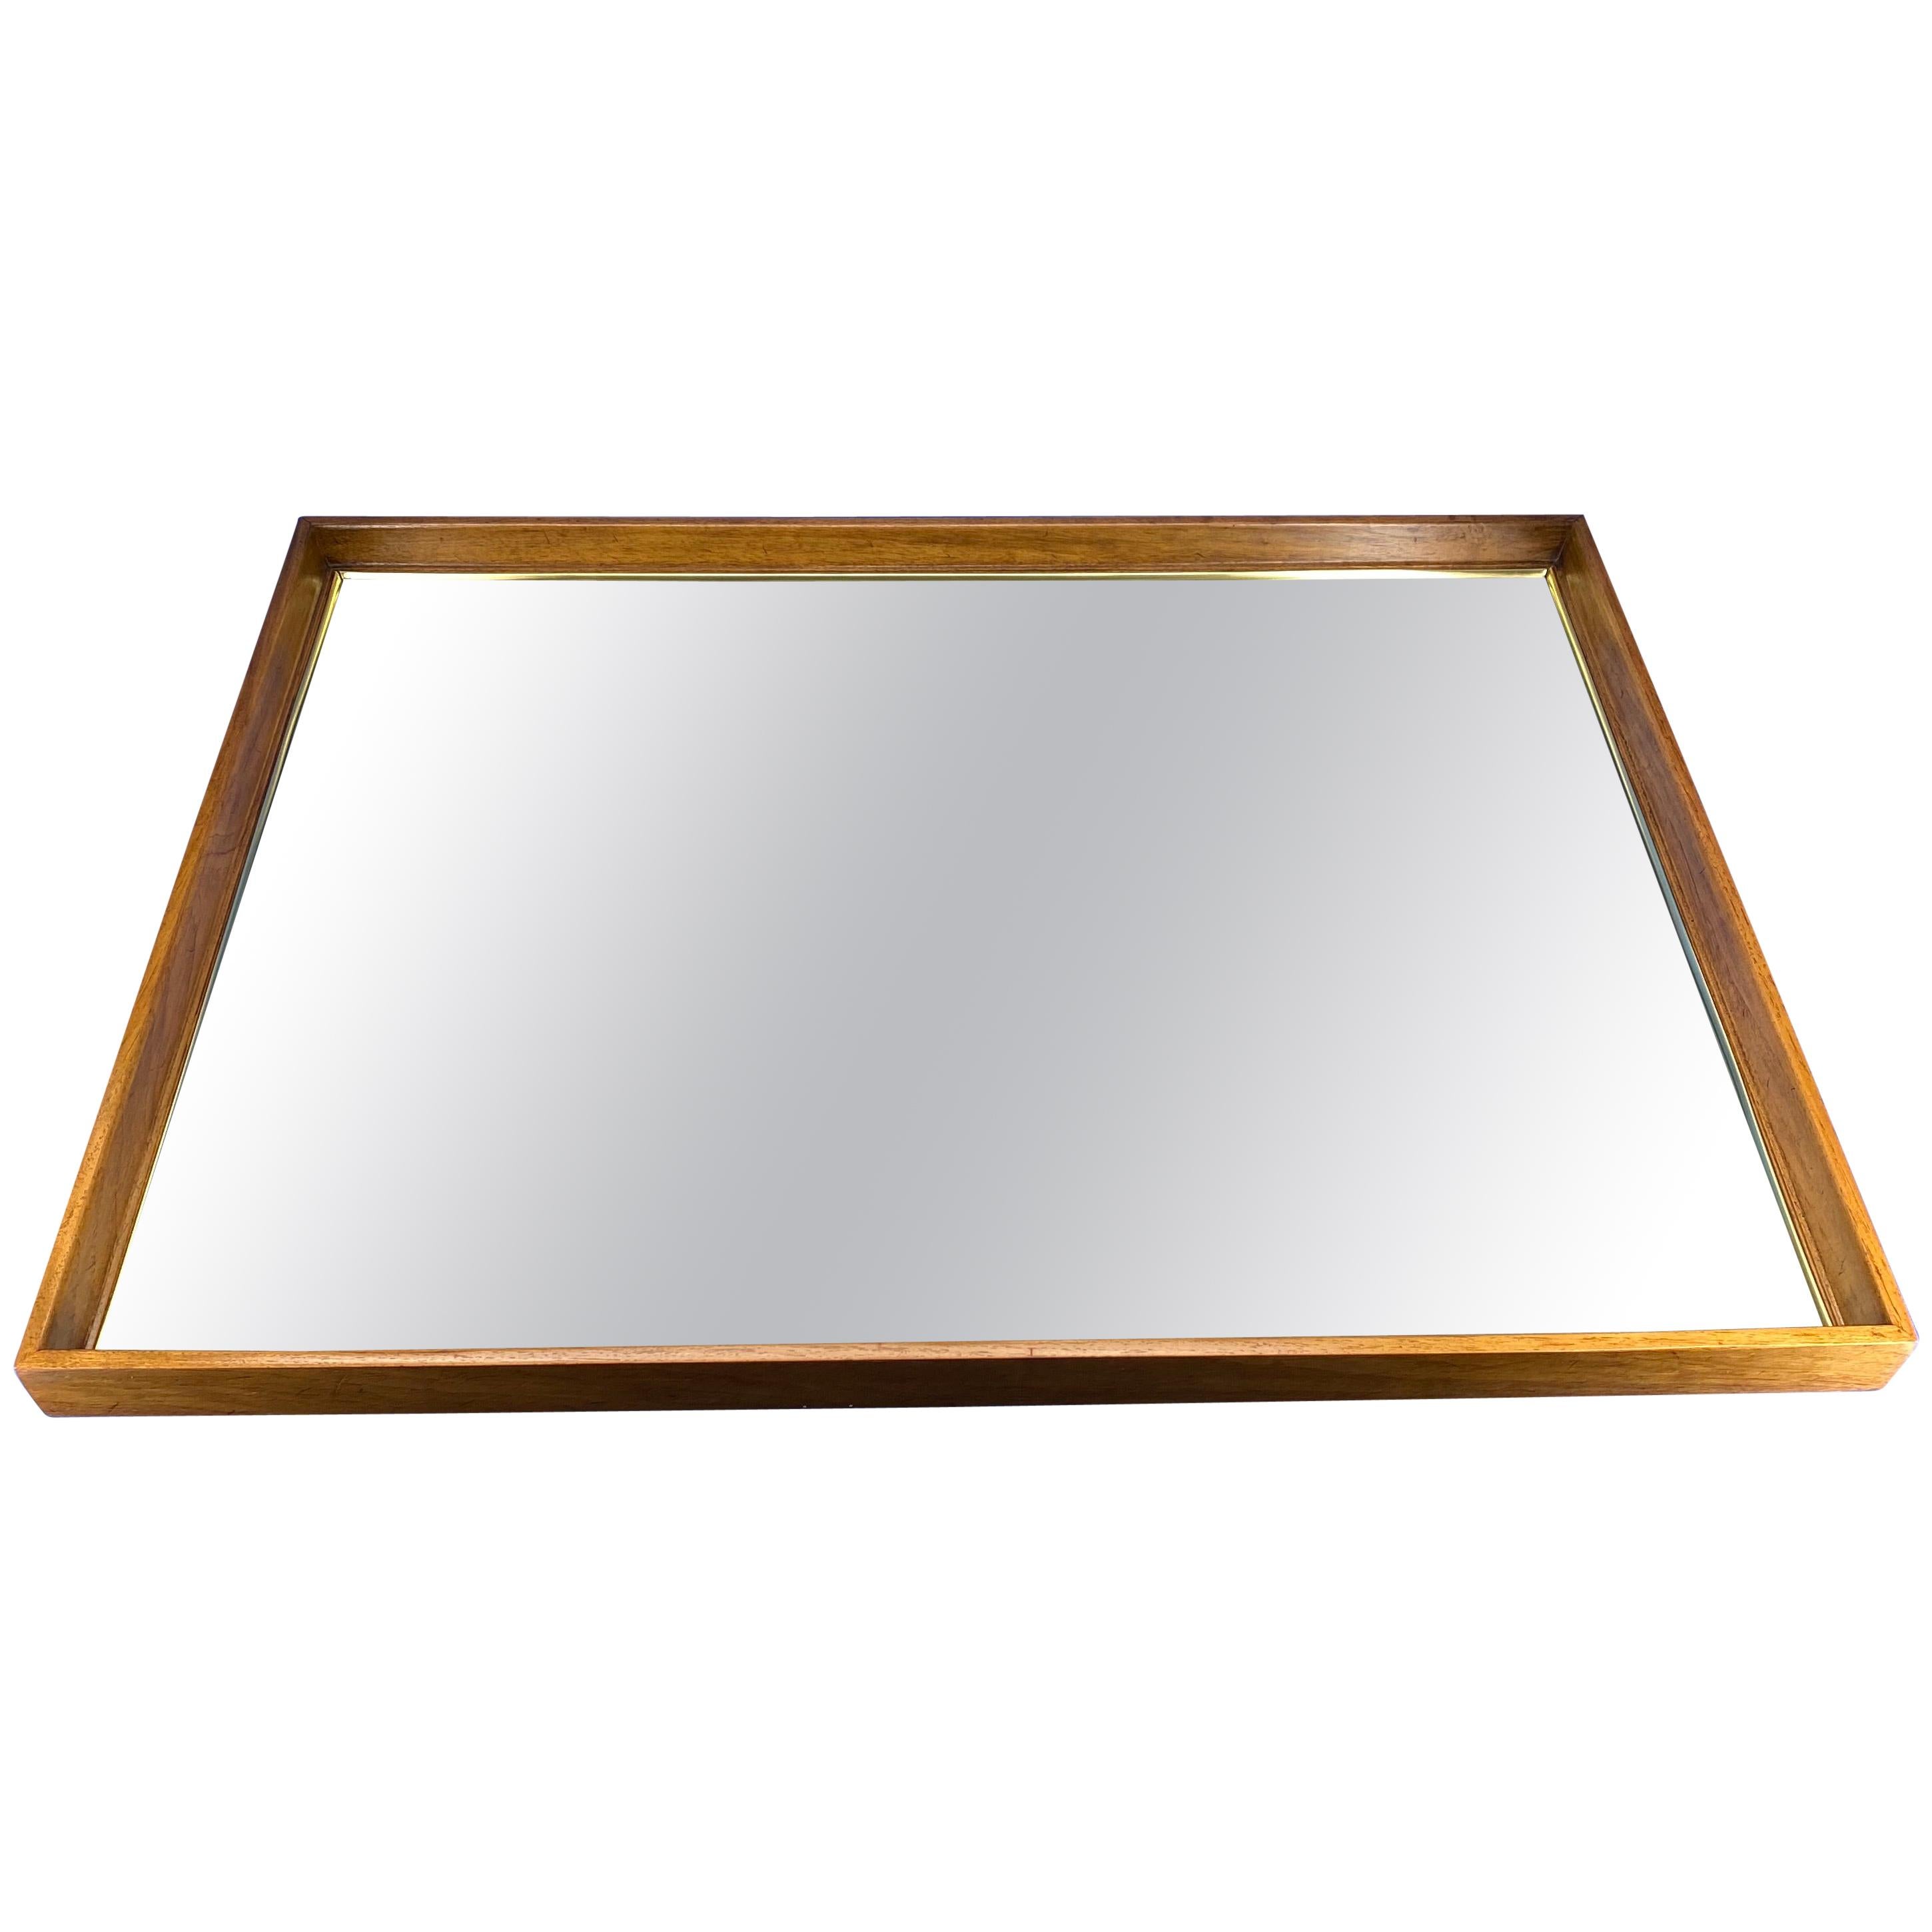 Large Wooden Mid-Century Modern Rectangular Wall Mirror For Sale